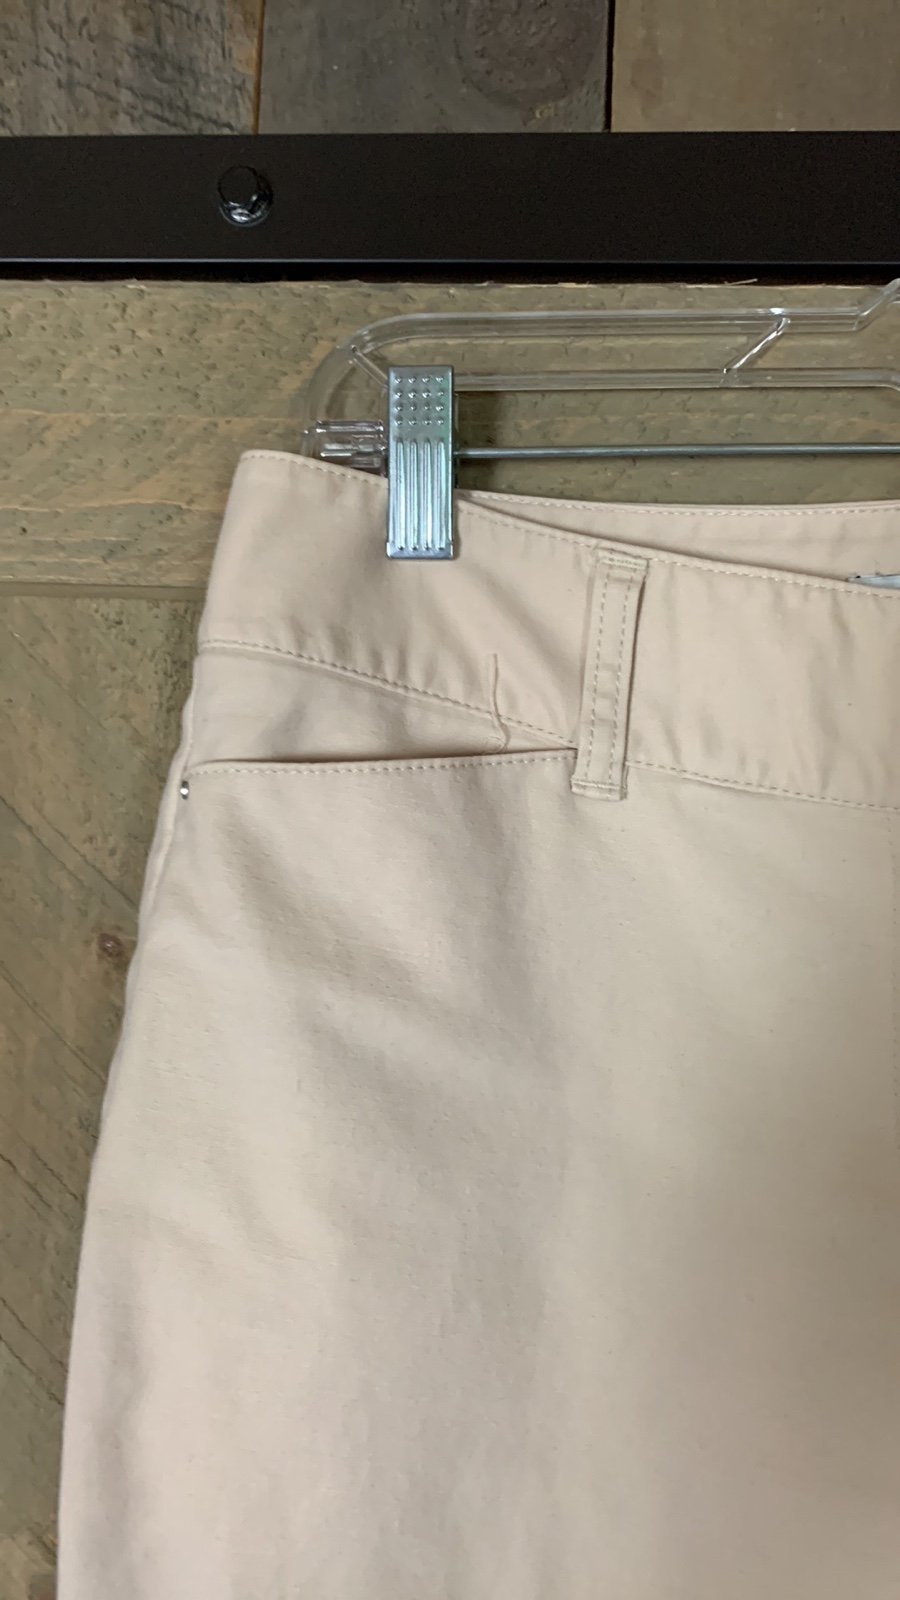 cheapest place to buy  White House Black Market cropped pants light khaki color  Size 8 MbsC9UvGe online store